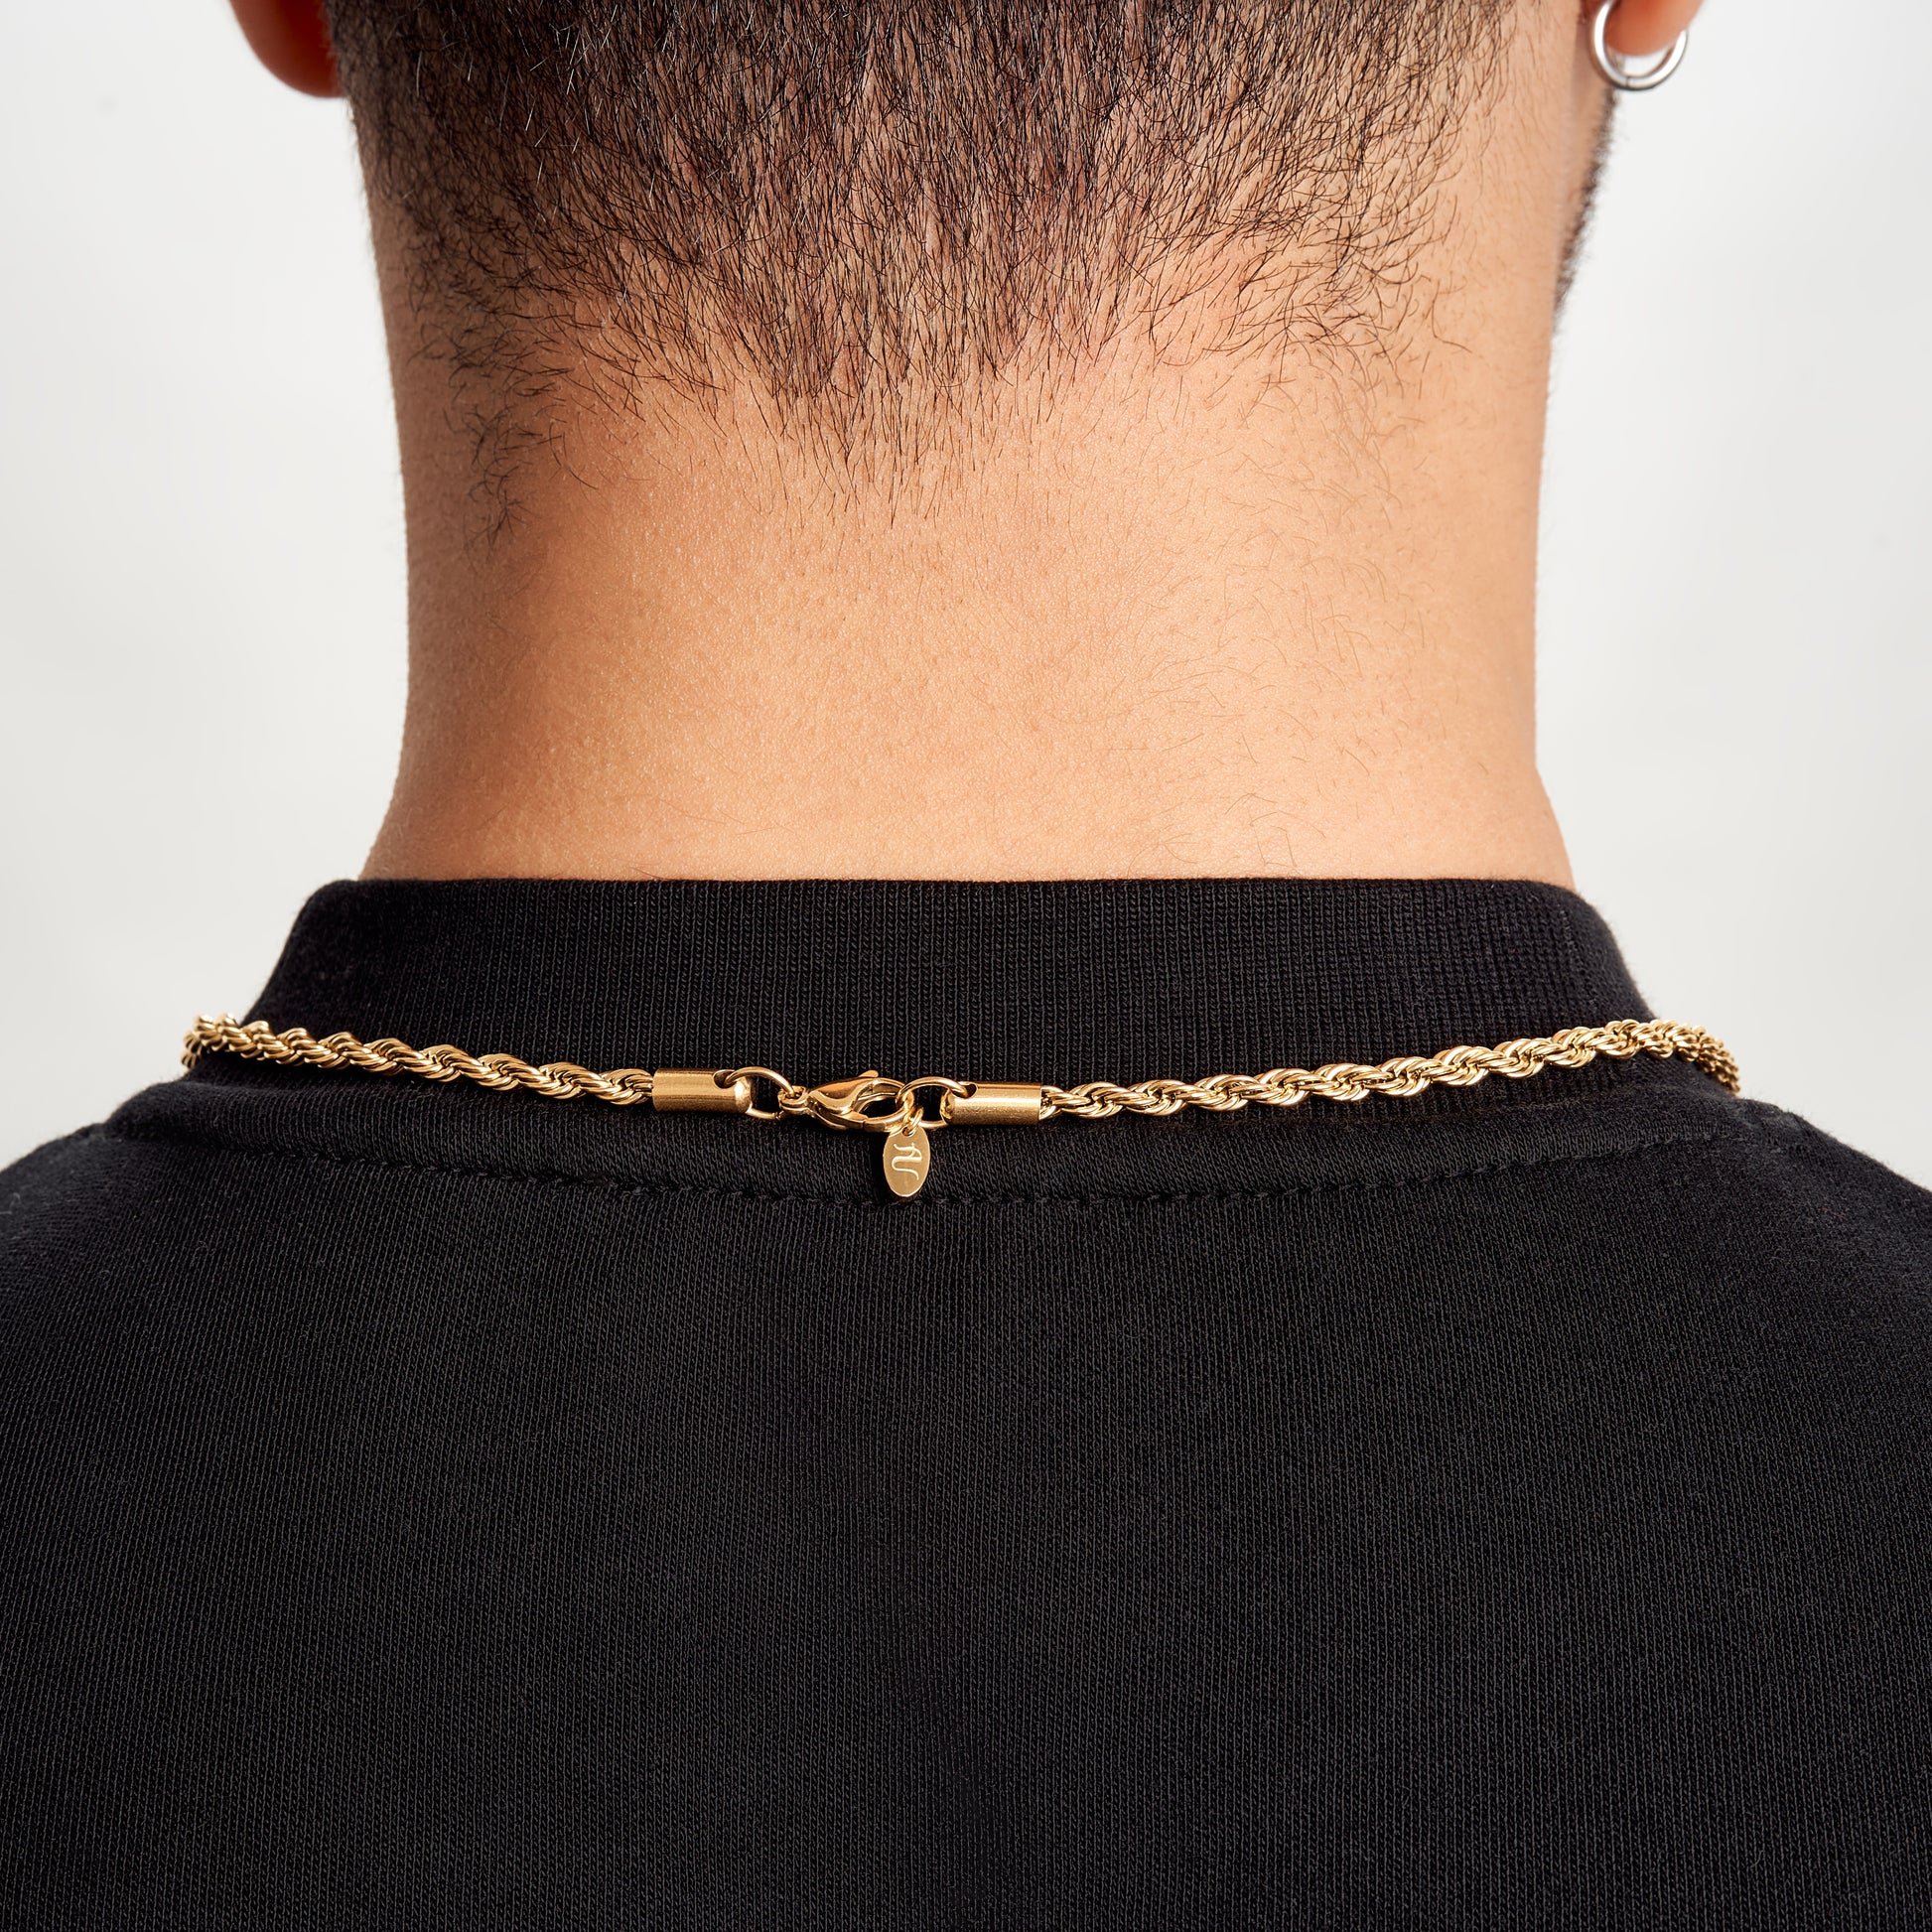 Gold Rope Chain Jewellery Necklace Men